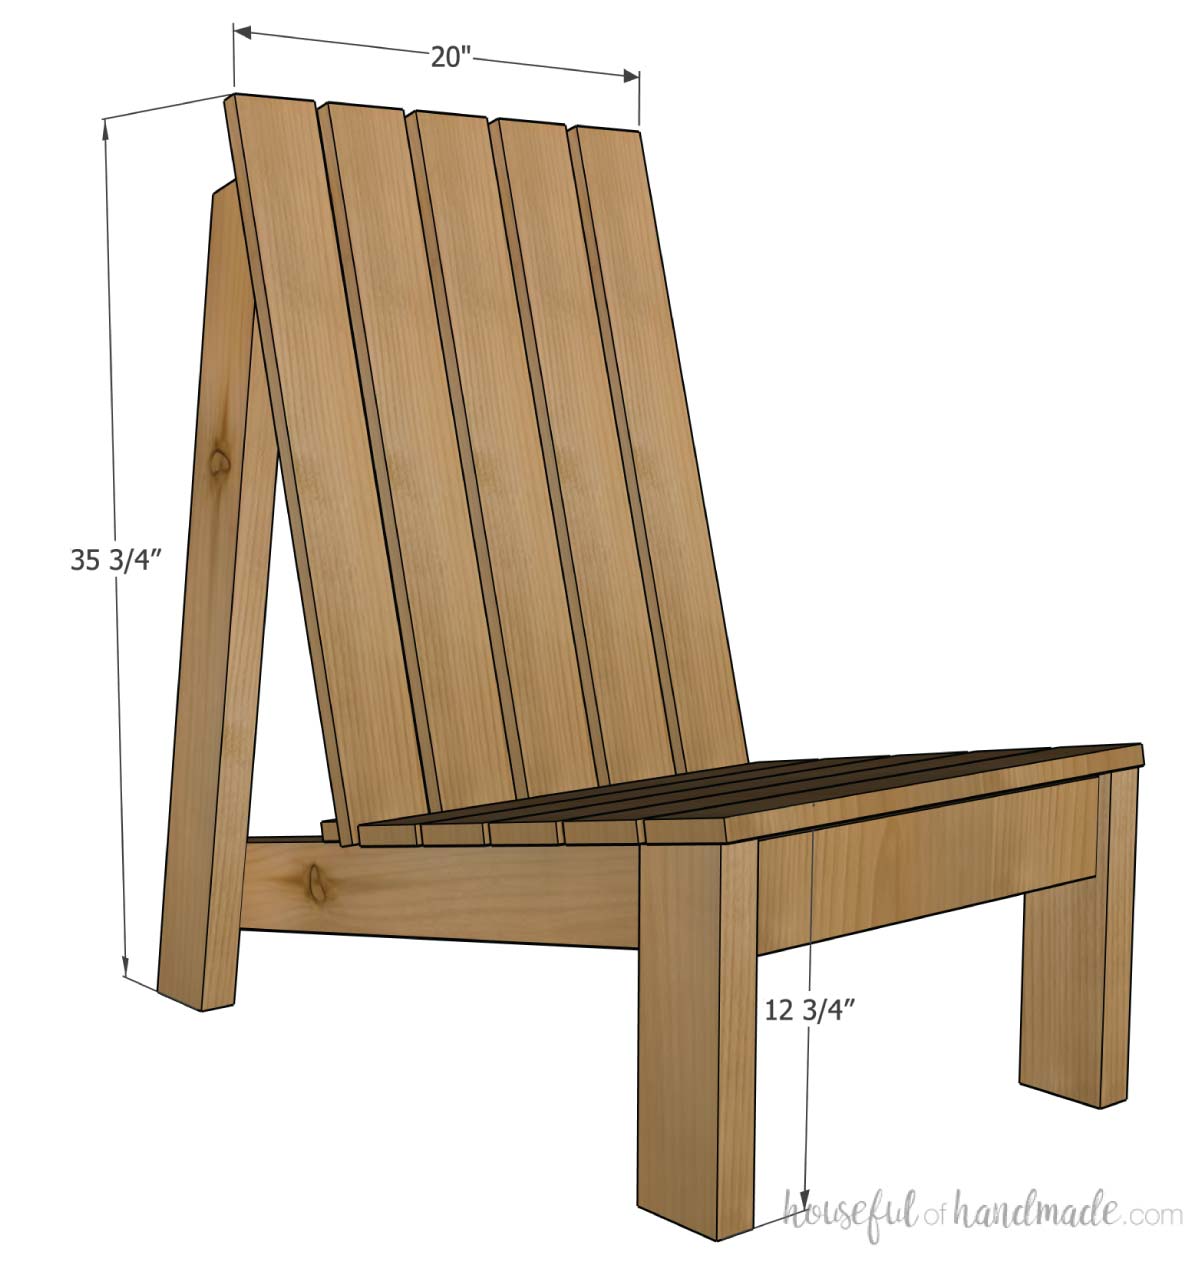 3D sketch of a modern adirondack chair with dimensions noted. 